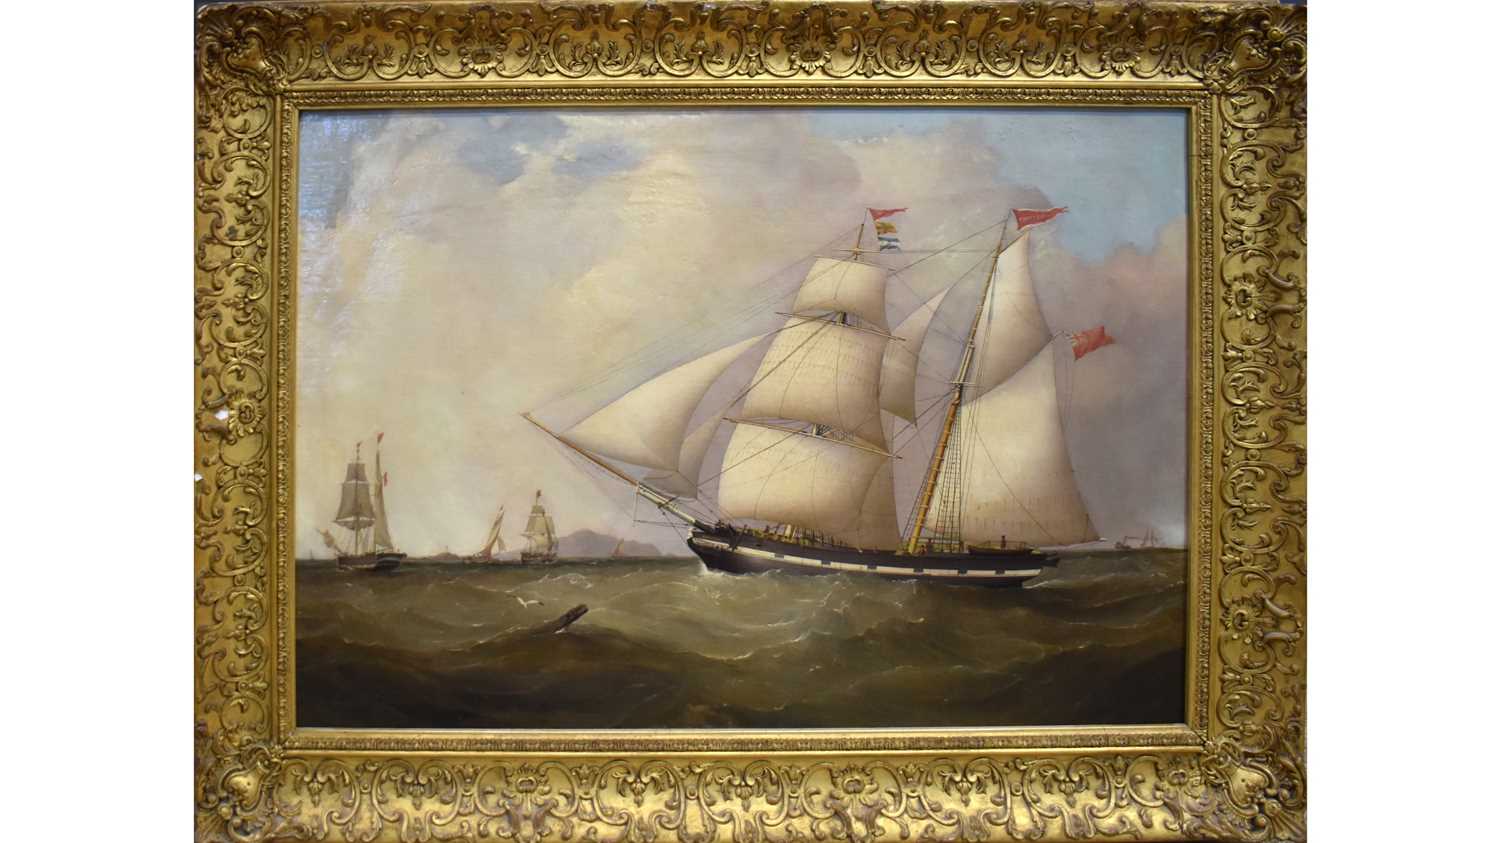 Lot 960 - Samuel Walters - The Liverpool Schooner Betsey Hall in Two Positions | oil